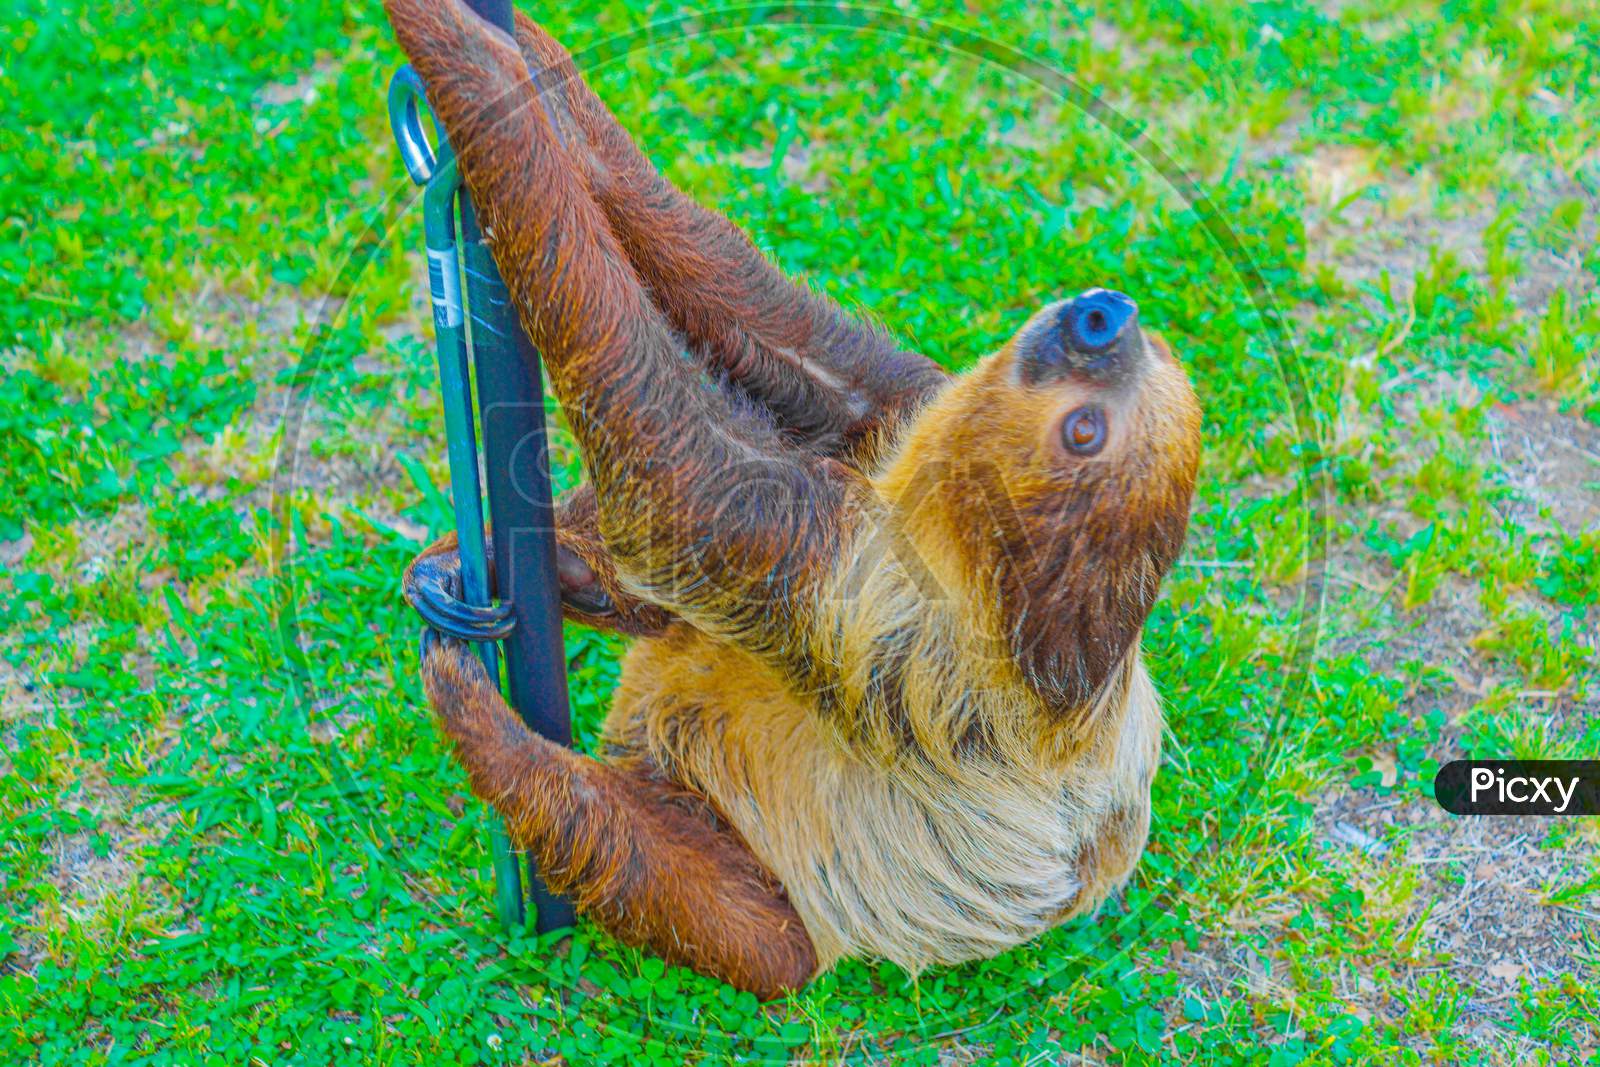 Image Of Sloth Hanging In The Bar